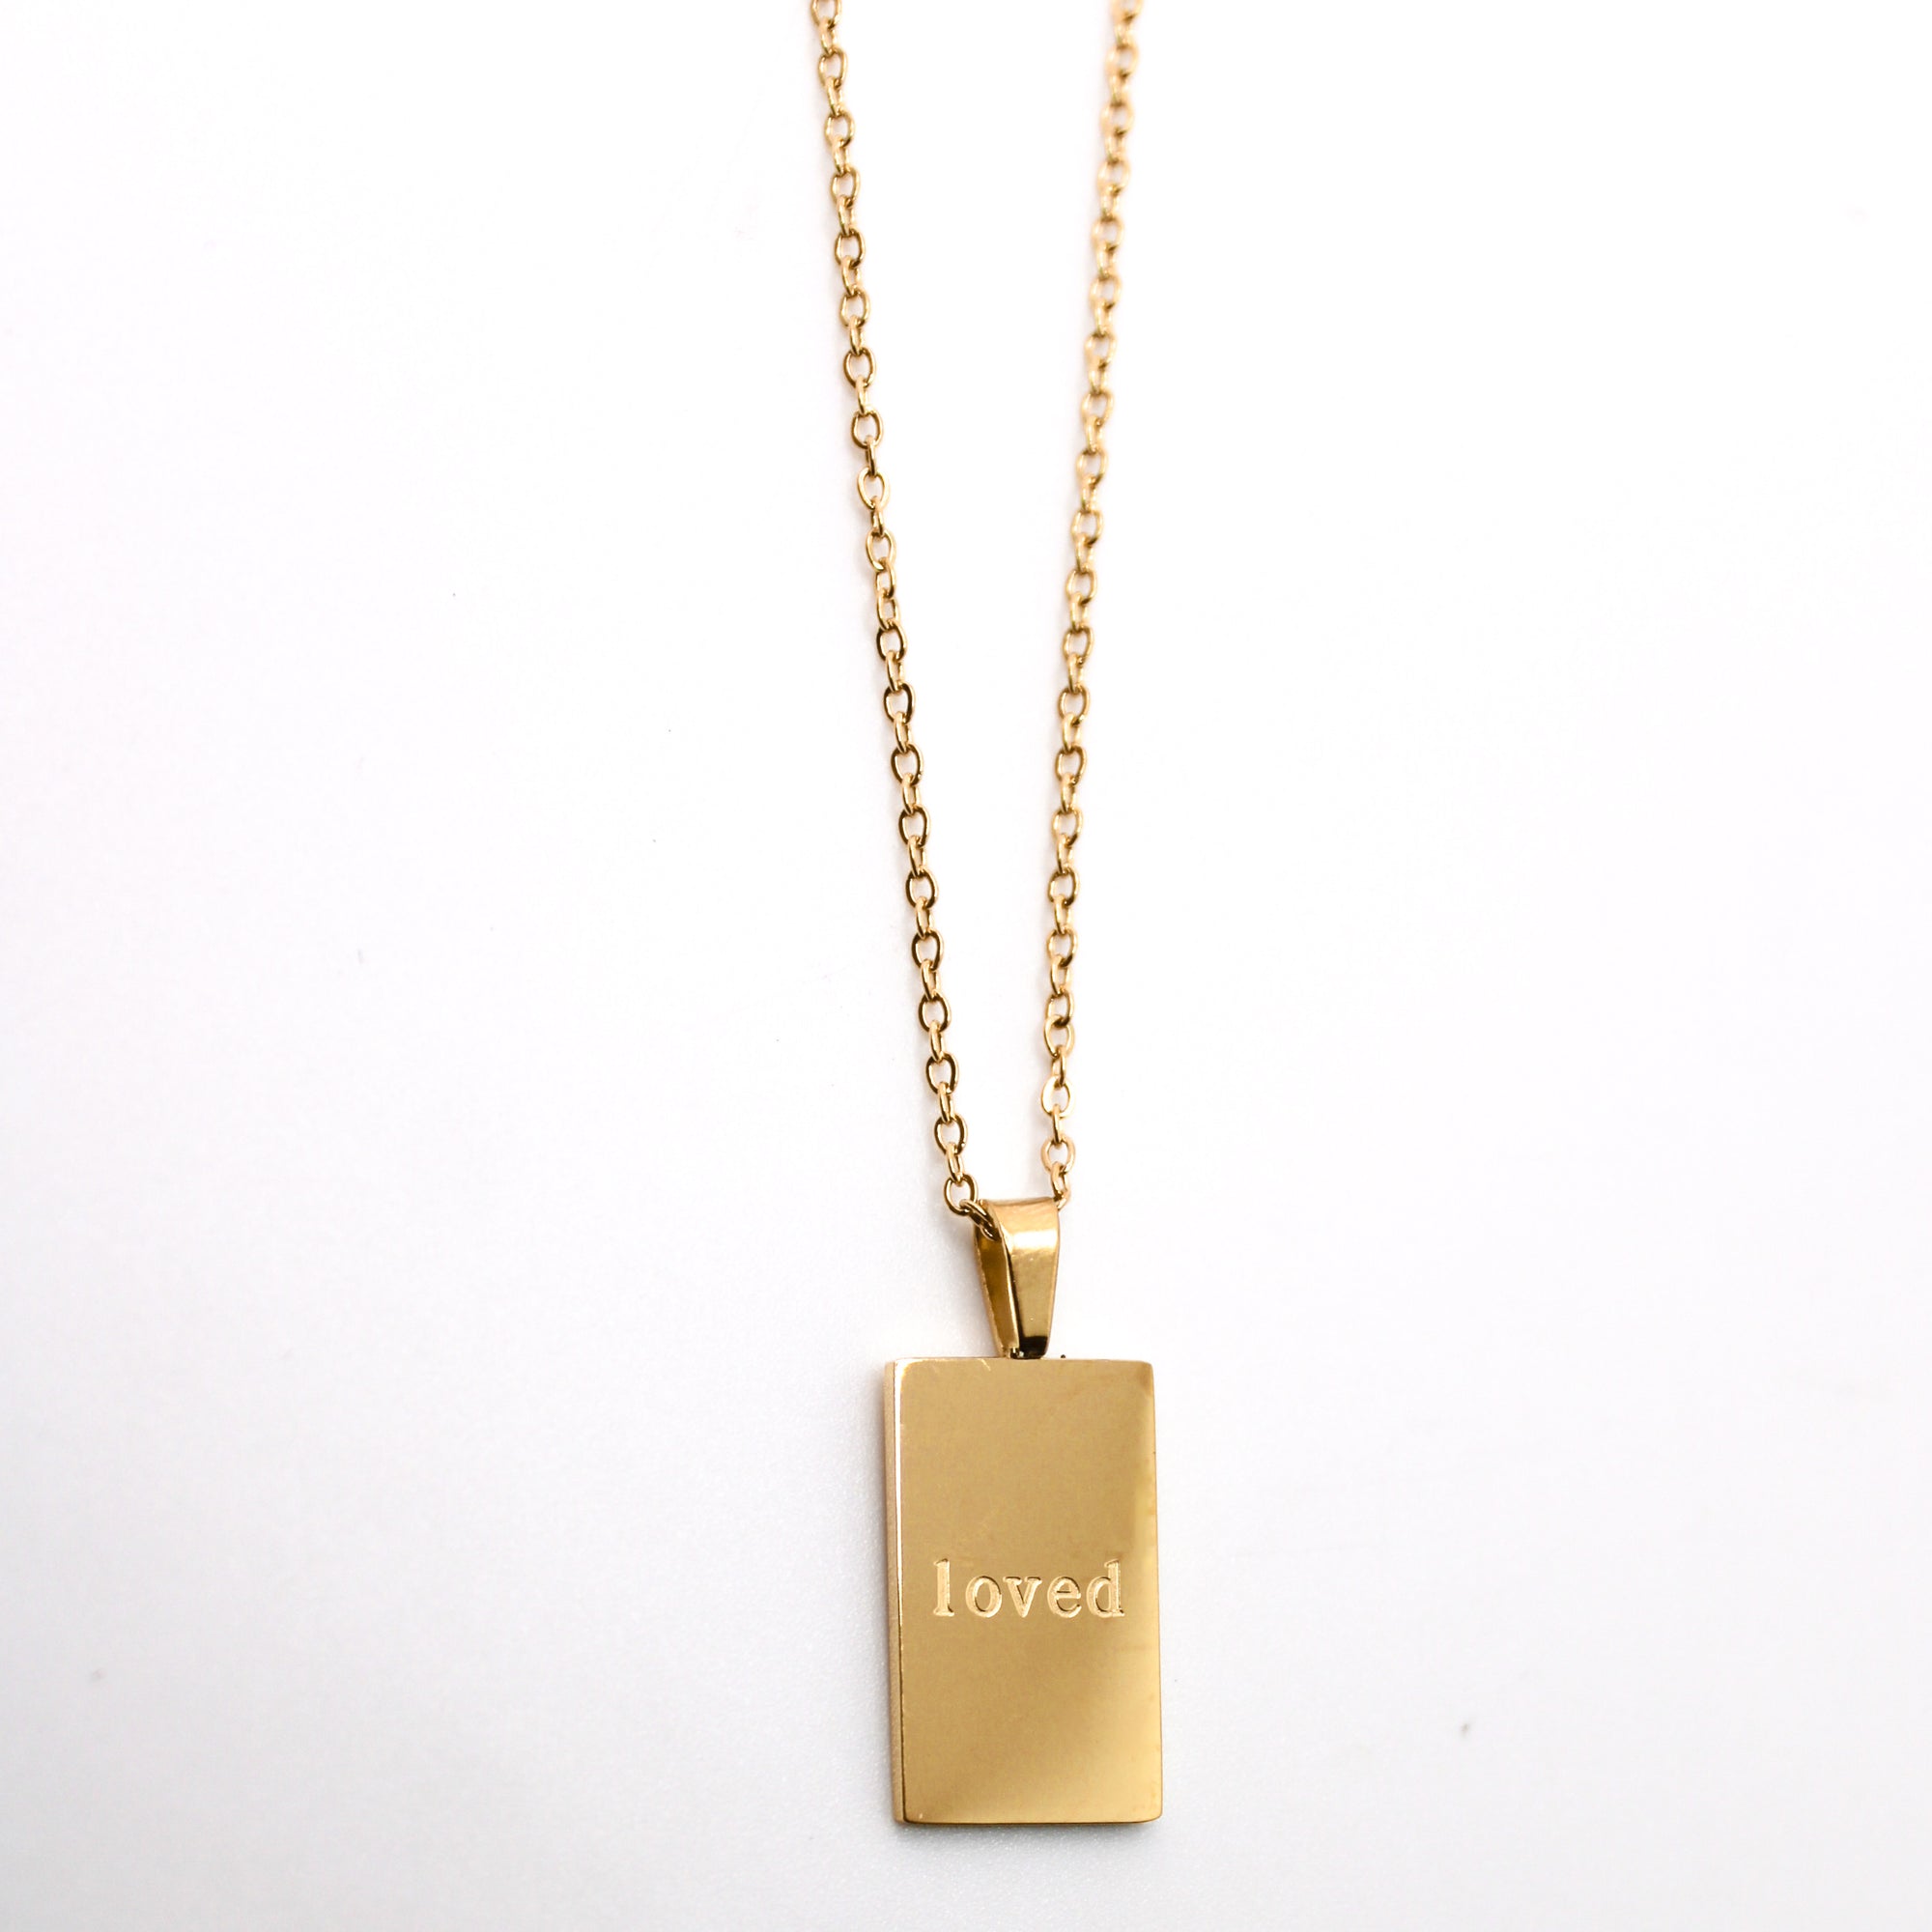 Loved Necklace - For the Girls Jewelry